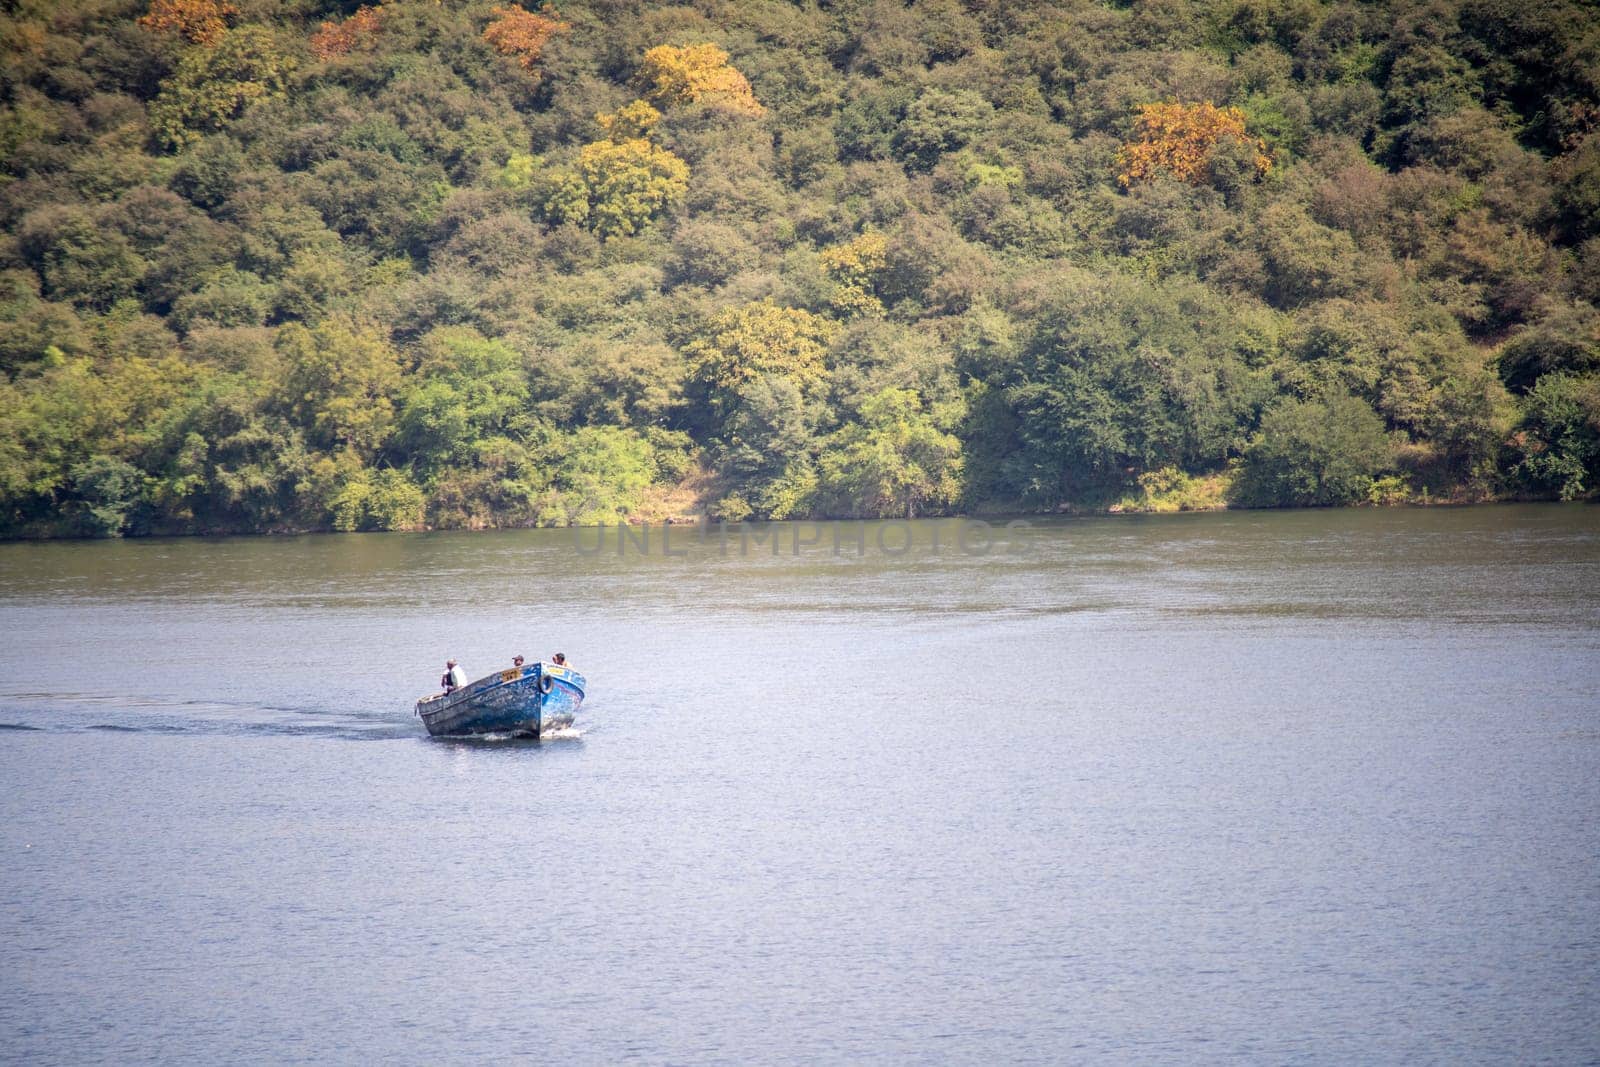 aerial drone shot of handmade boat used by rural villagers to cross over lakes like Dhebar, Pichola from tree covered mountains as a ferry service by Shalinimathur